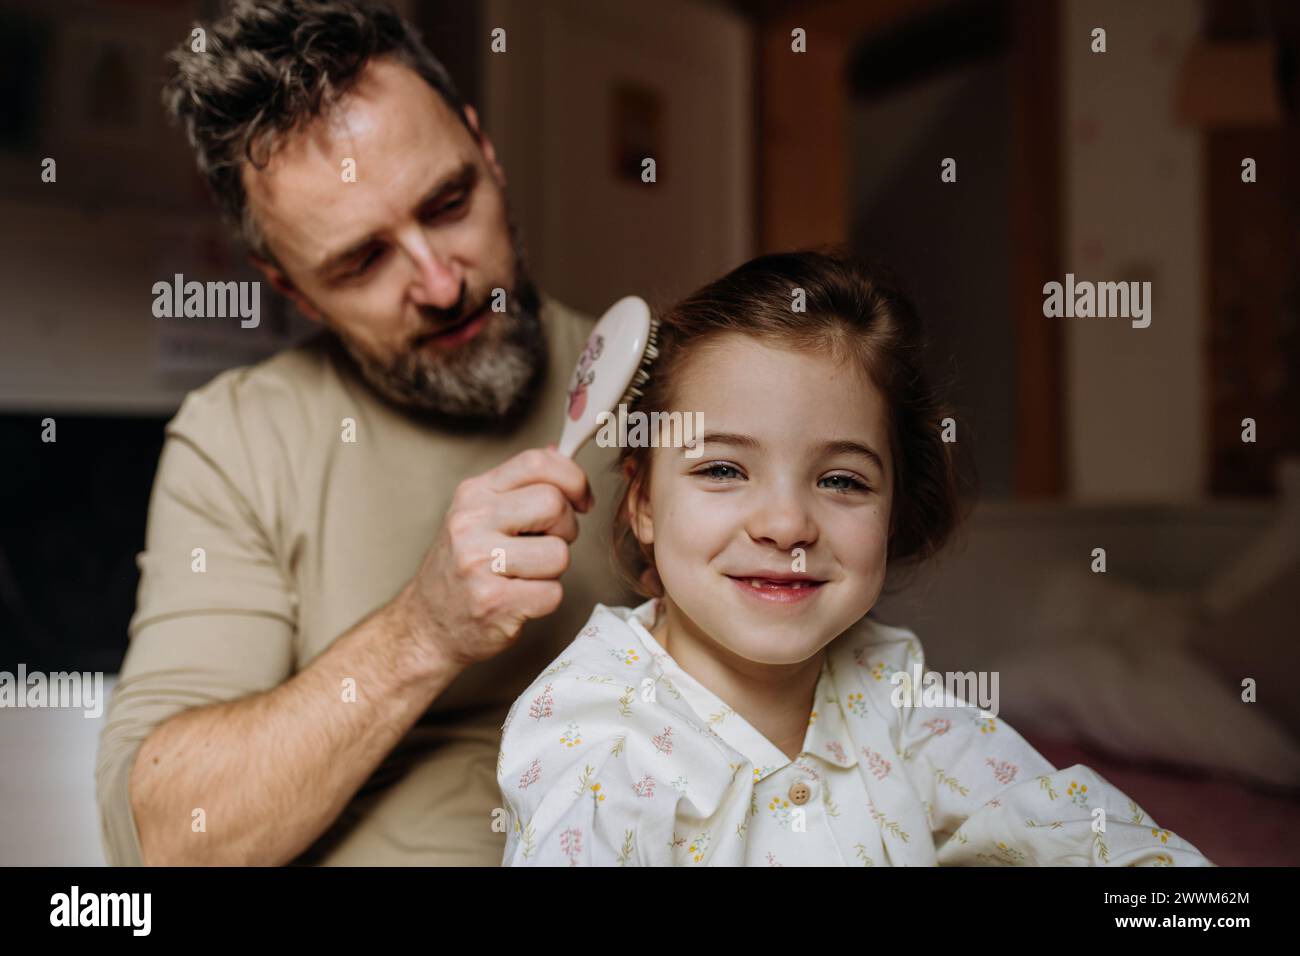 Father combing and braiding daughter's hair as part of bedtime routine. Single dad taking care of his daughter's hairstyle. Stock Photo